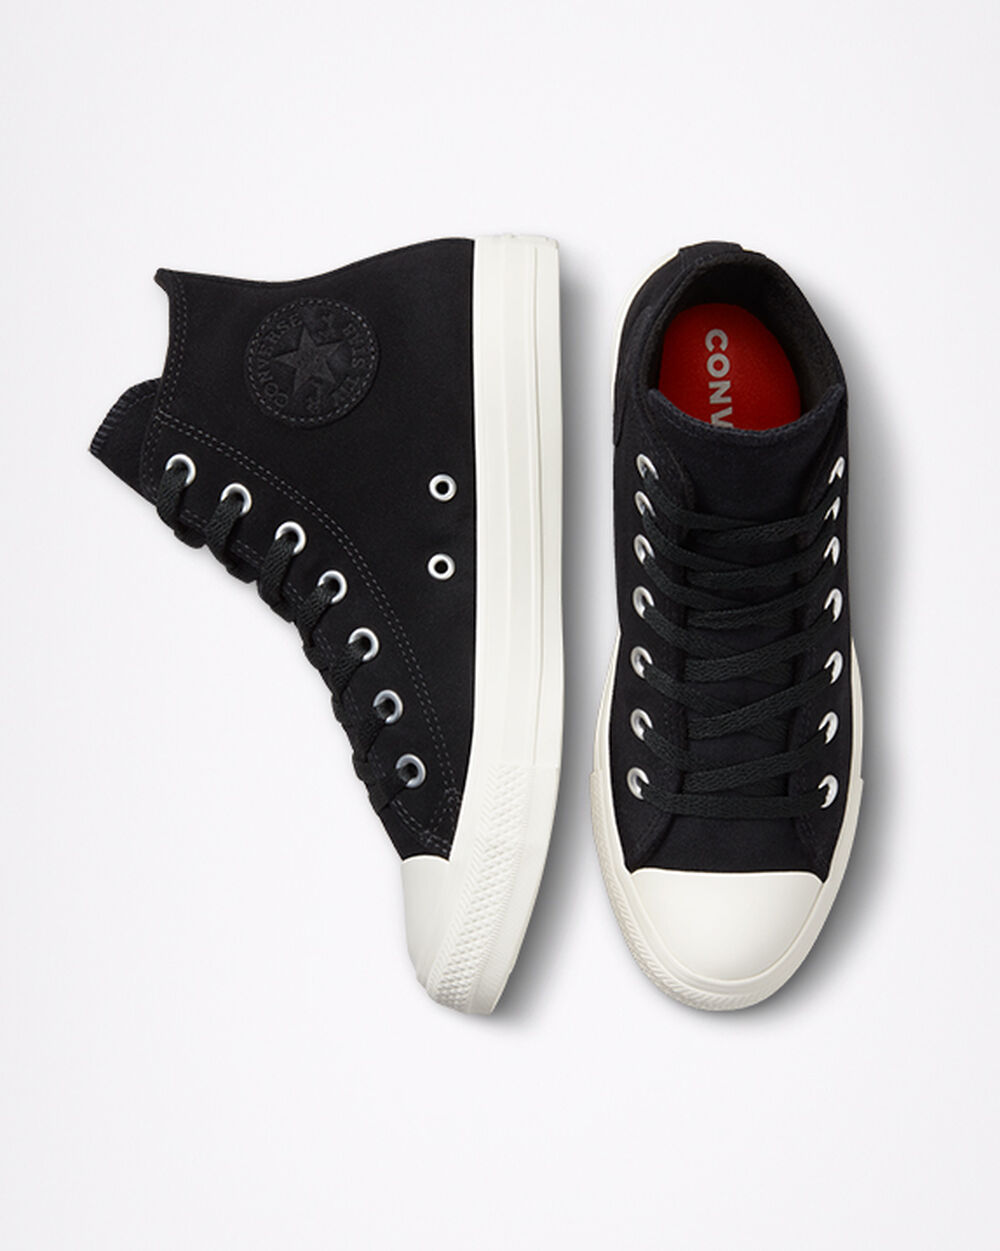 Tenis Converse Chuck Taylor All Star Mujer Negros Blancos | Mexico-23466